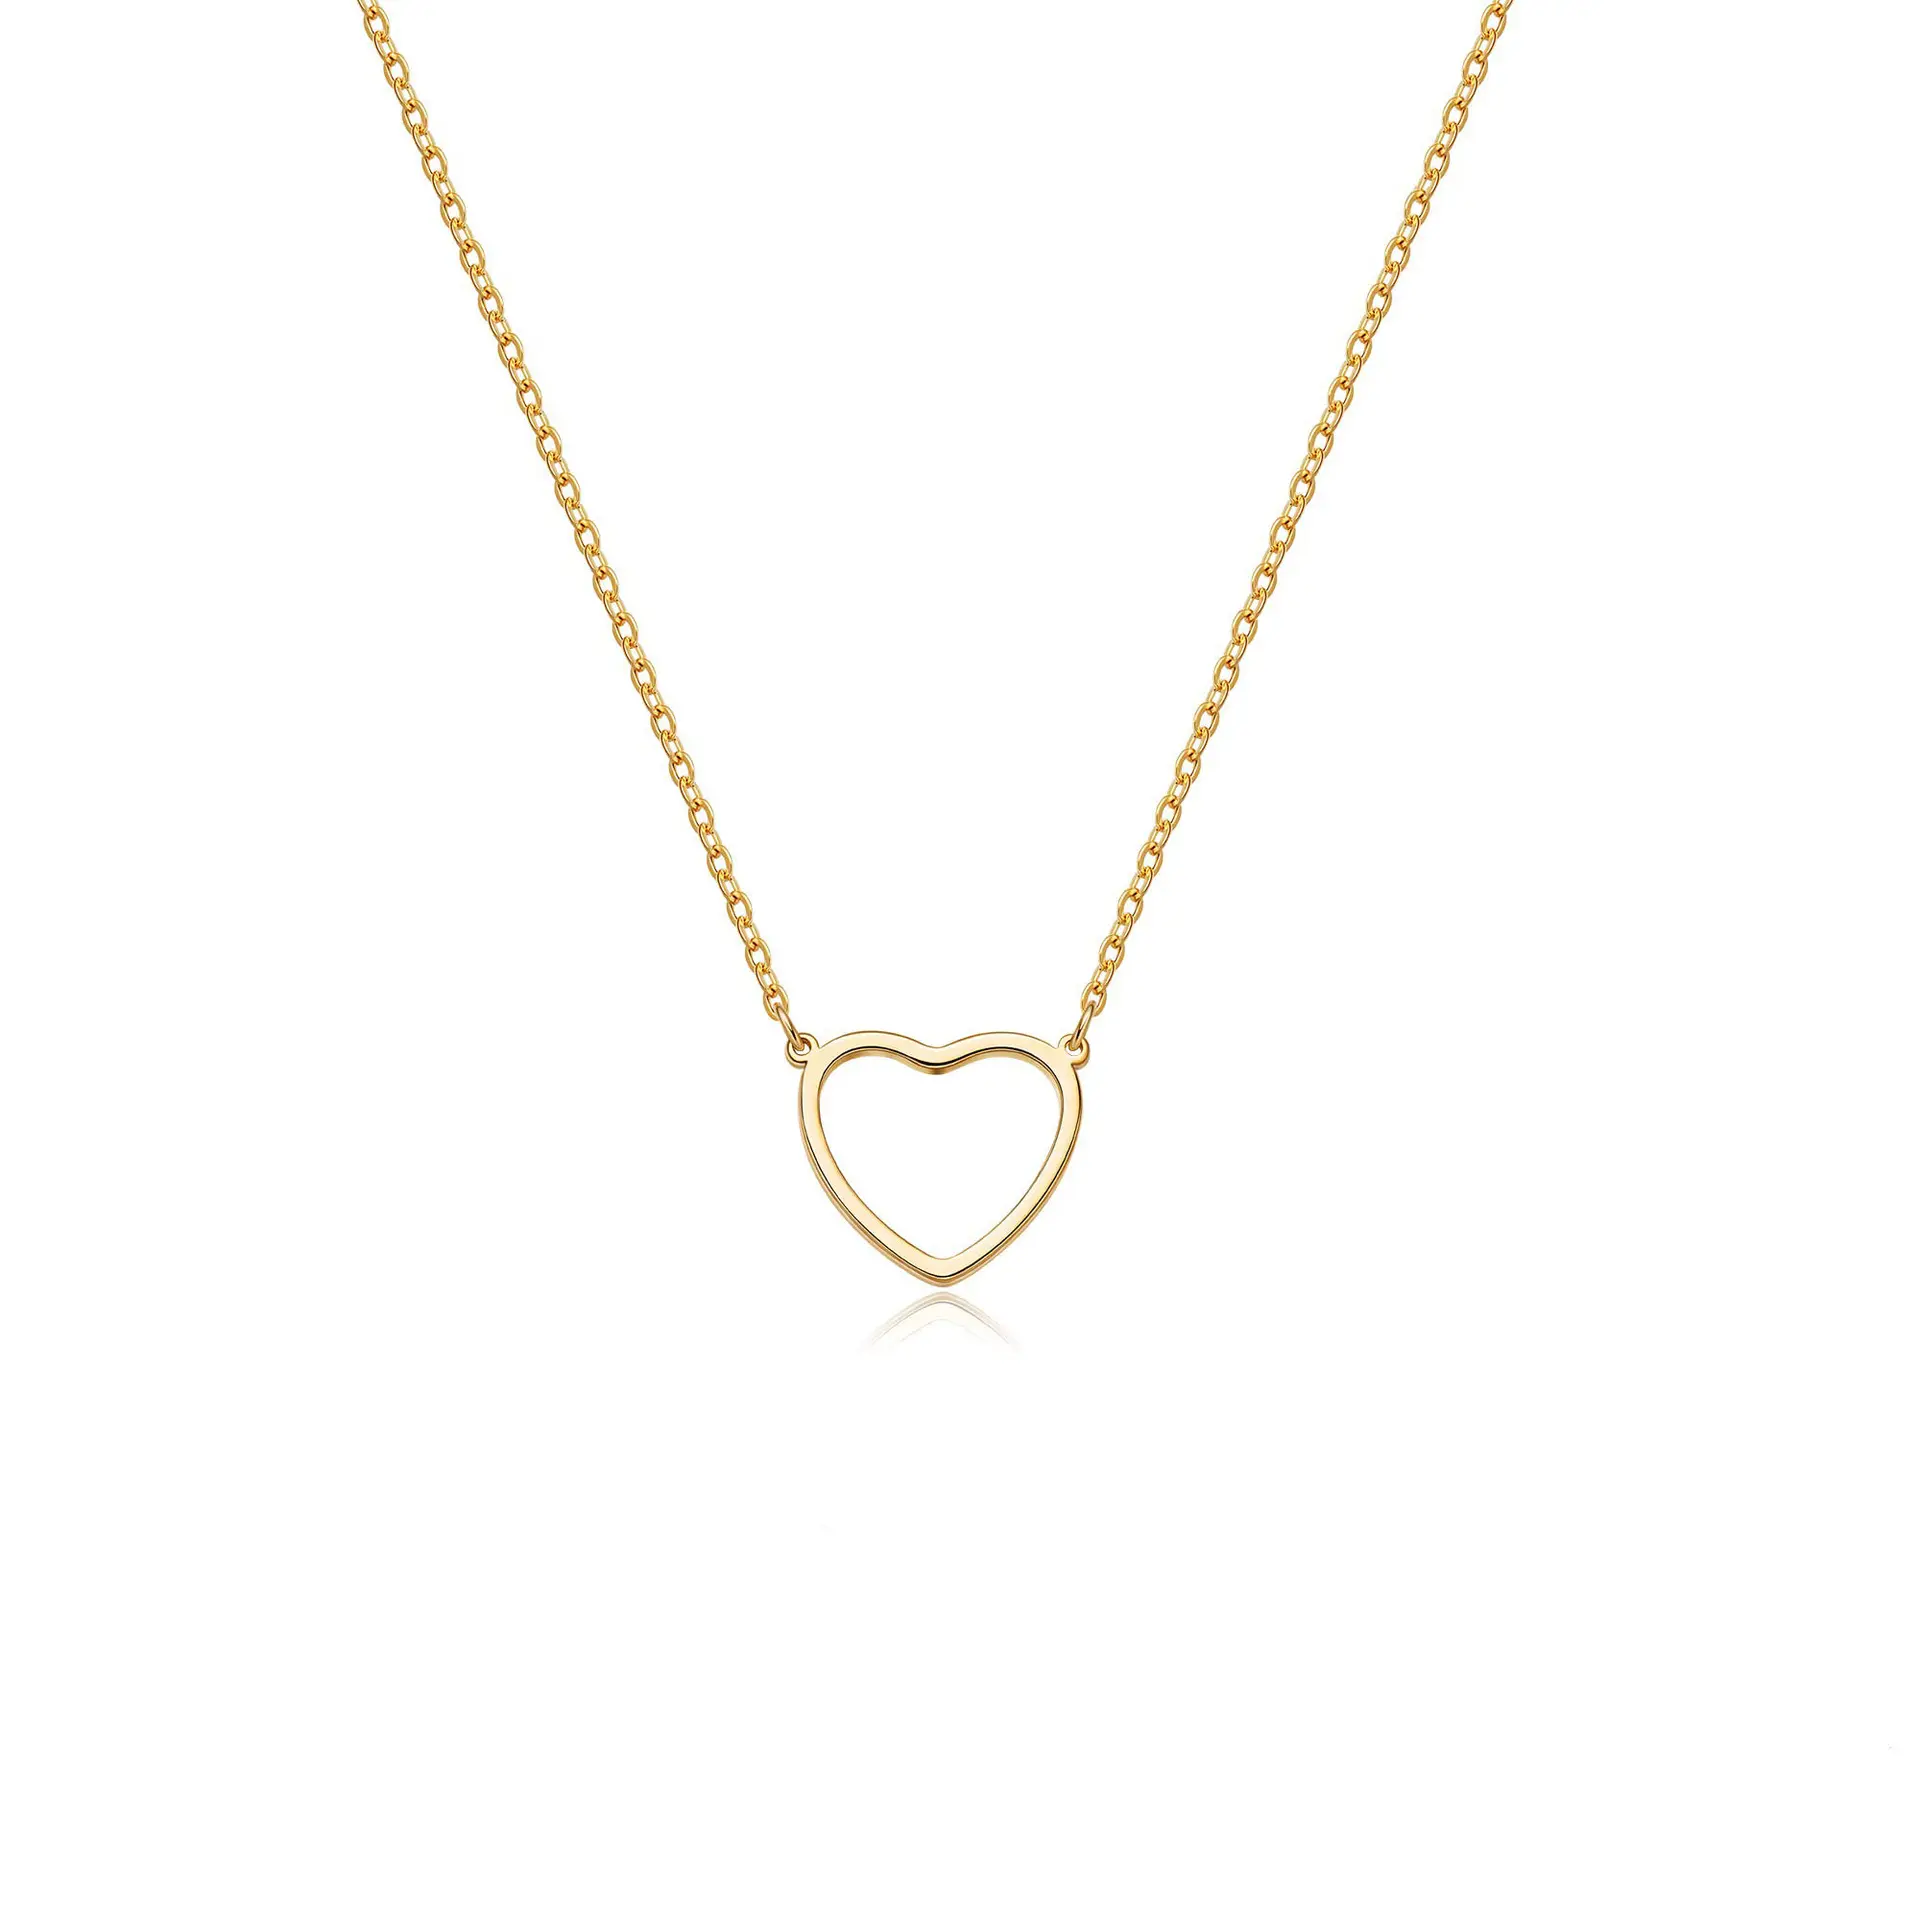 Cute Heart Necklace Mini 14k gold Heart Heart necklace women's hollowed out stainless steel necklace